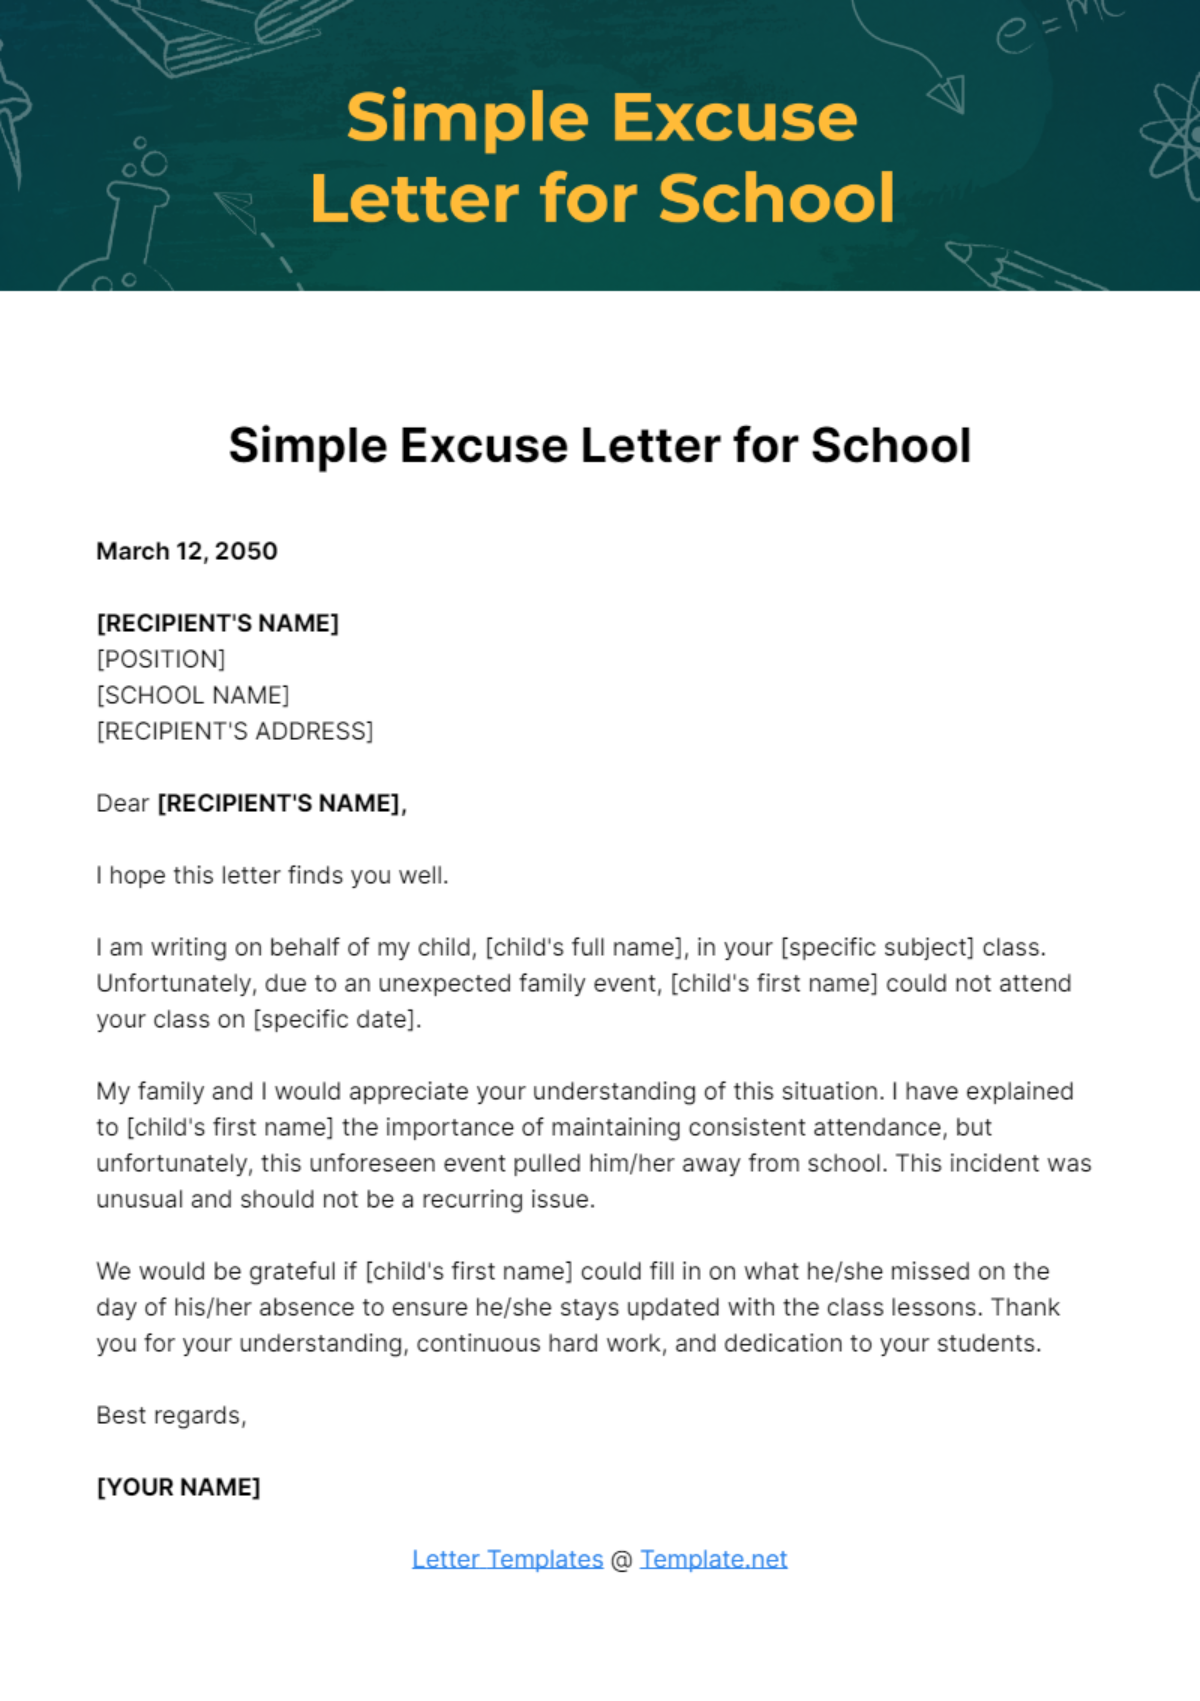 Free Simple Excuse Letter for School Template